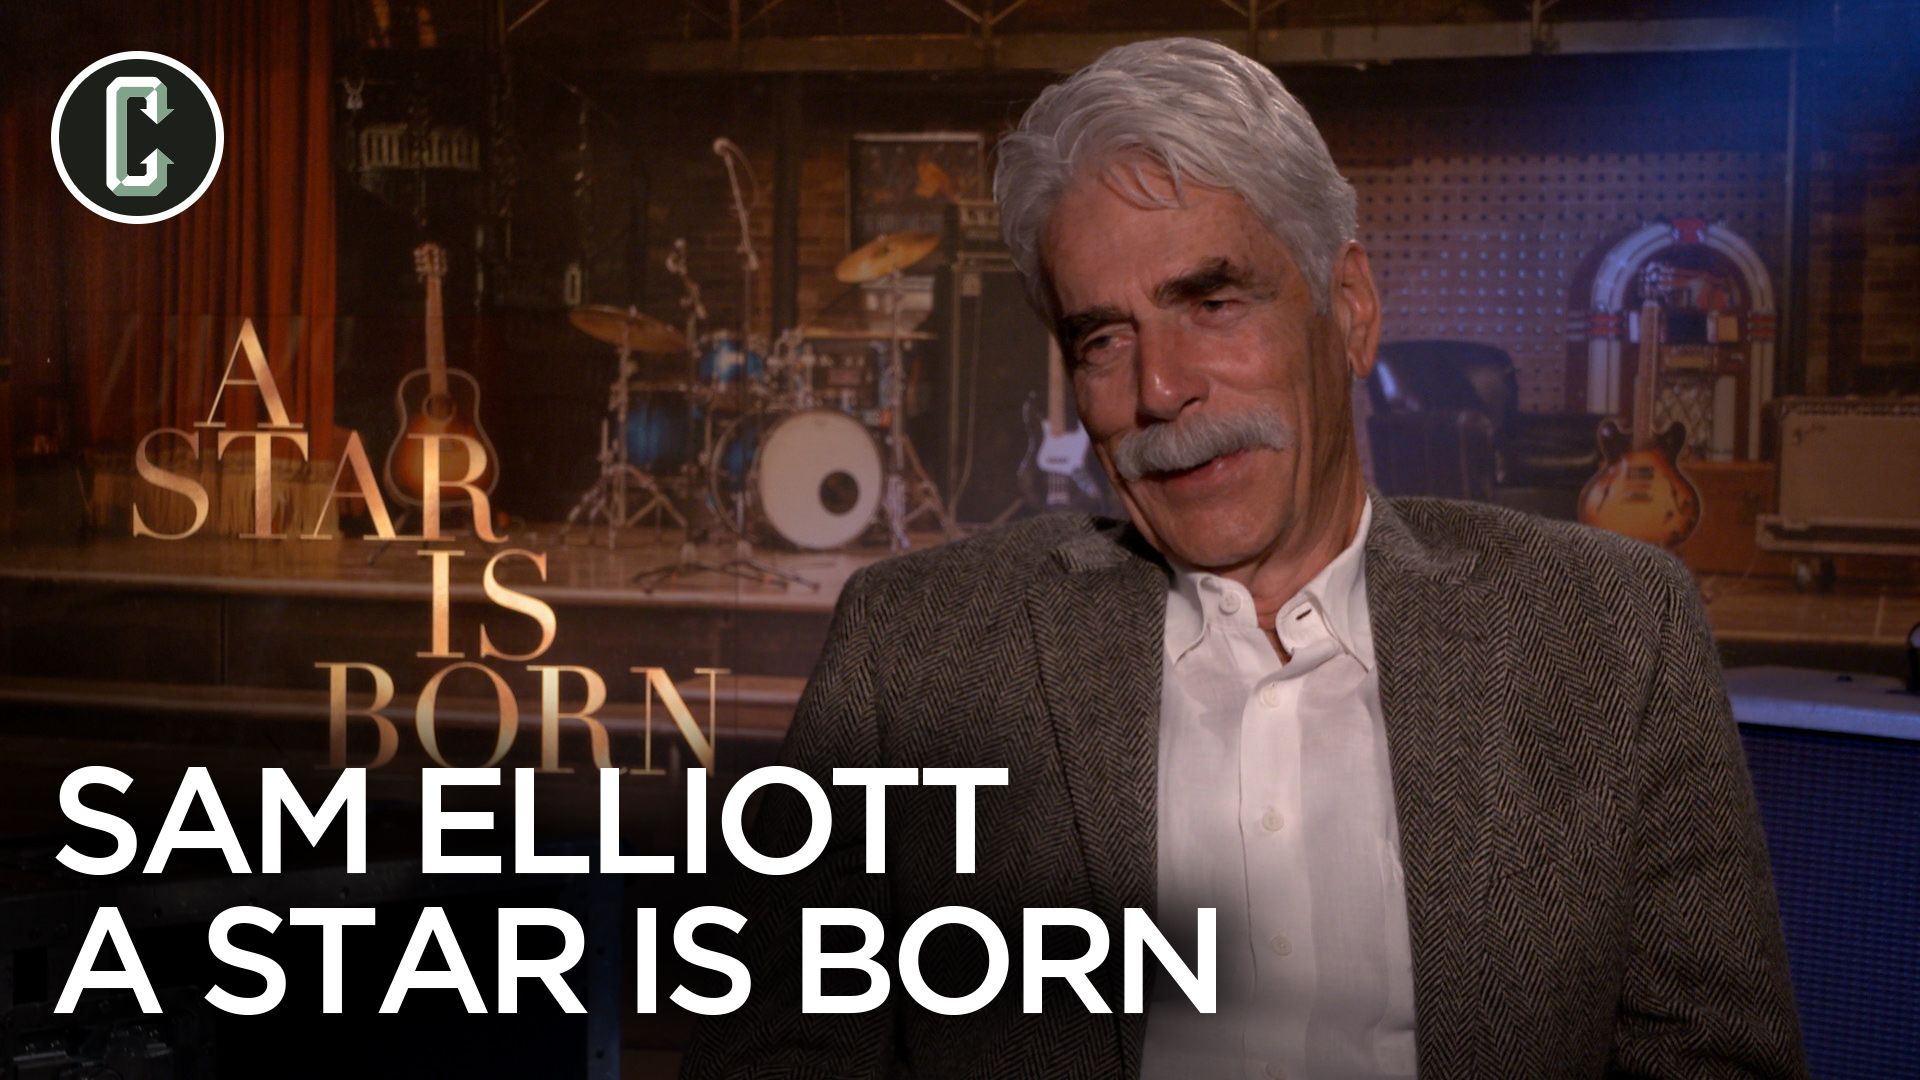 A Star Is Born: Sam Elliott on How Bradley Cooper Nailed His Voice | Collider1920 x 1080